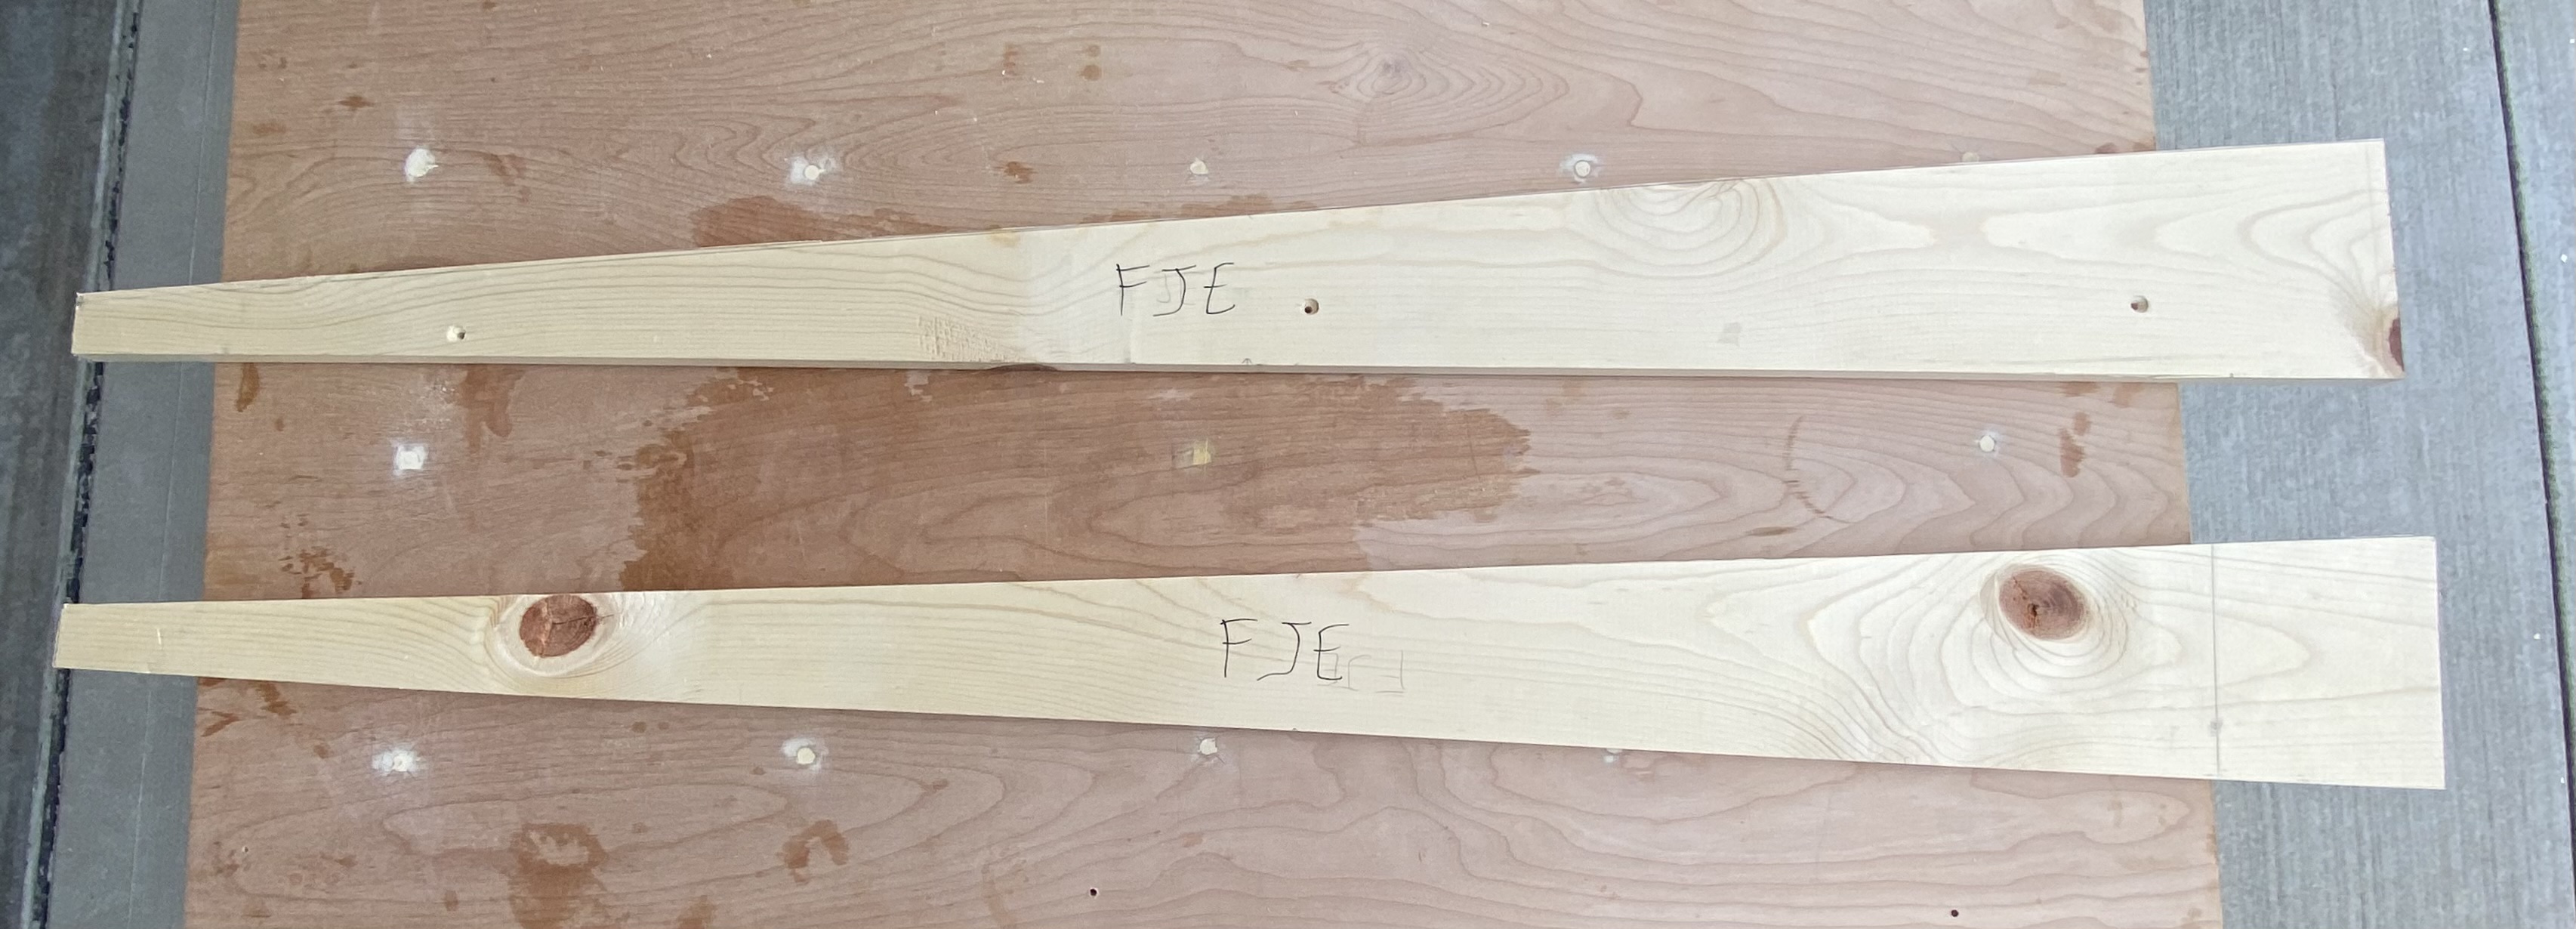 Image of the 2 finished FJE jigs